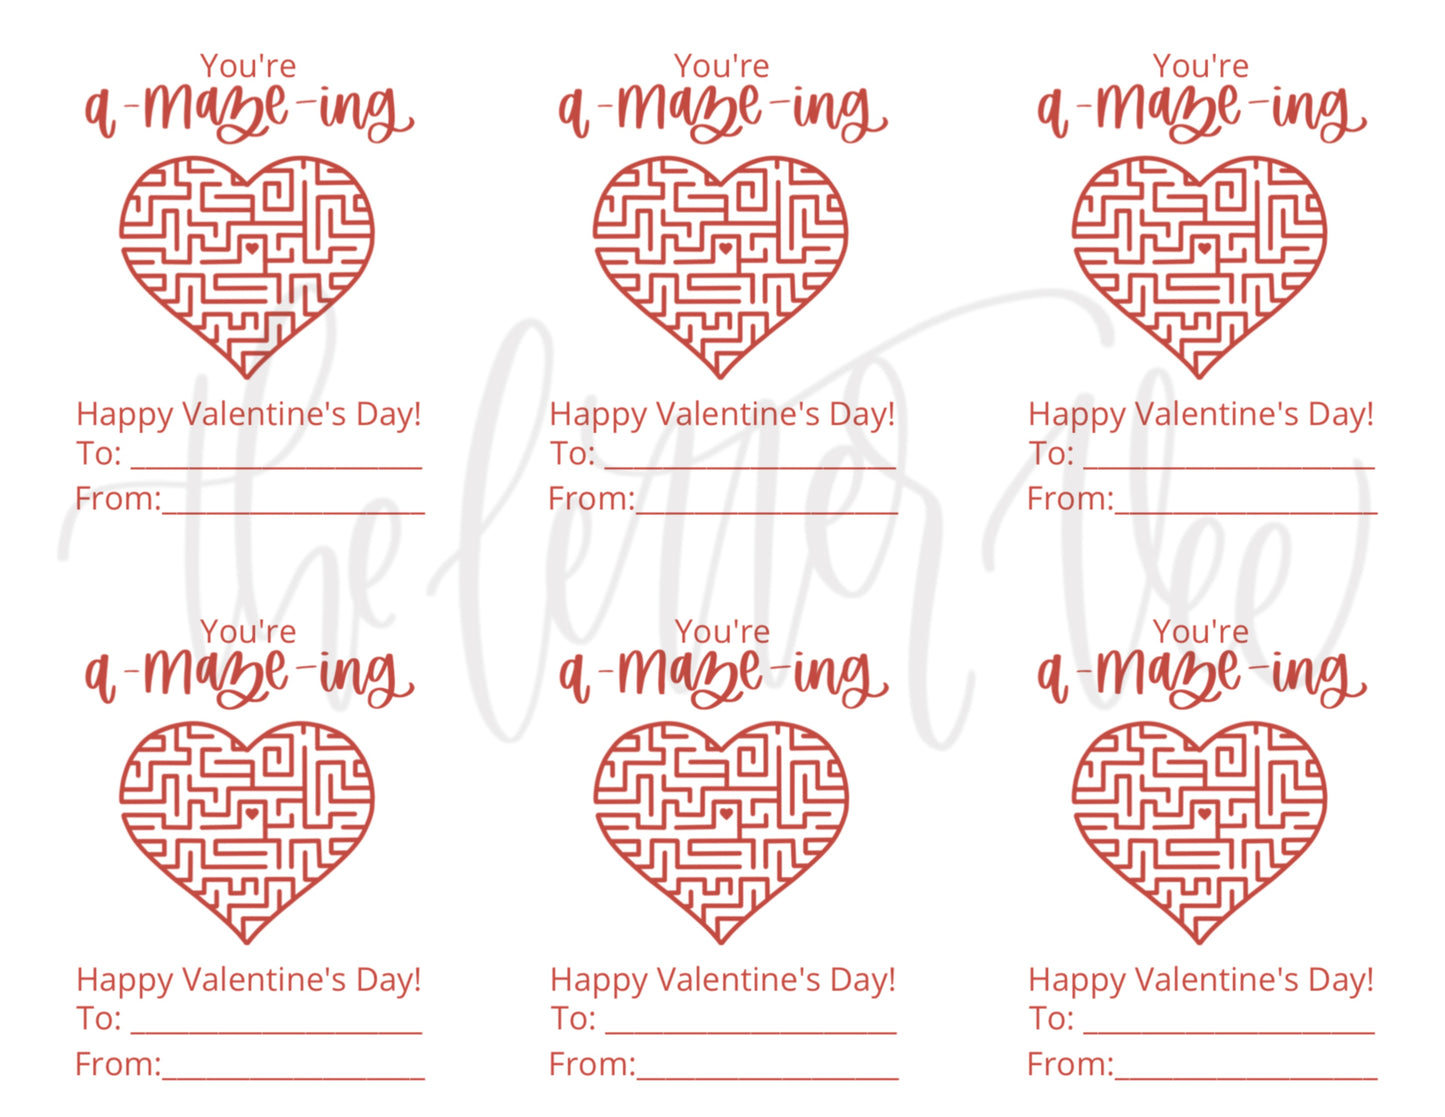 You're a-MAZE-ing | Printable Valentine